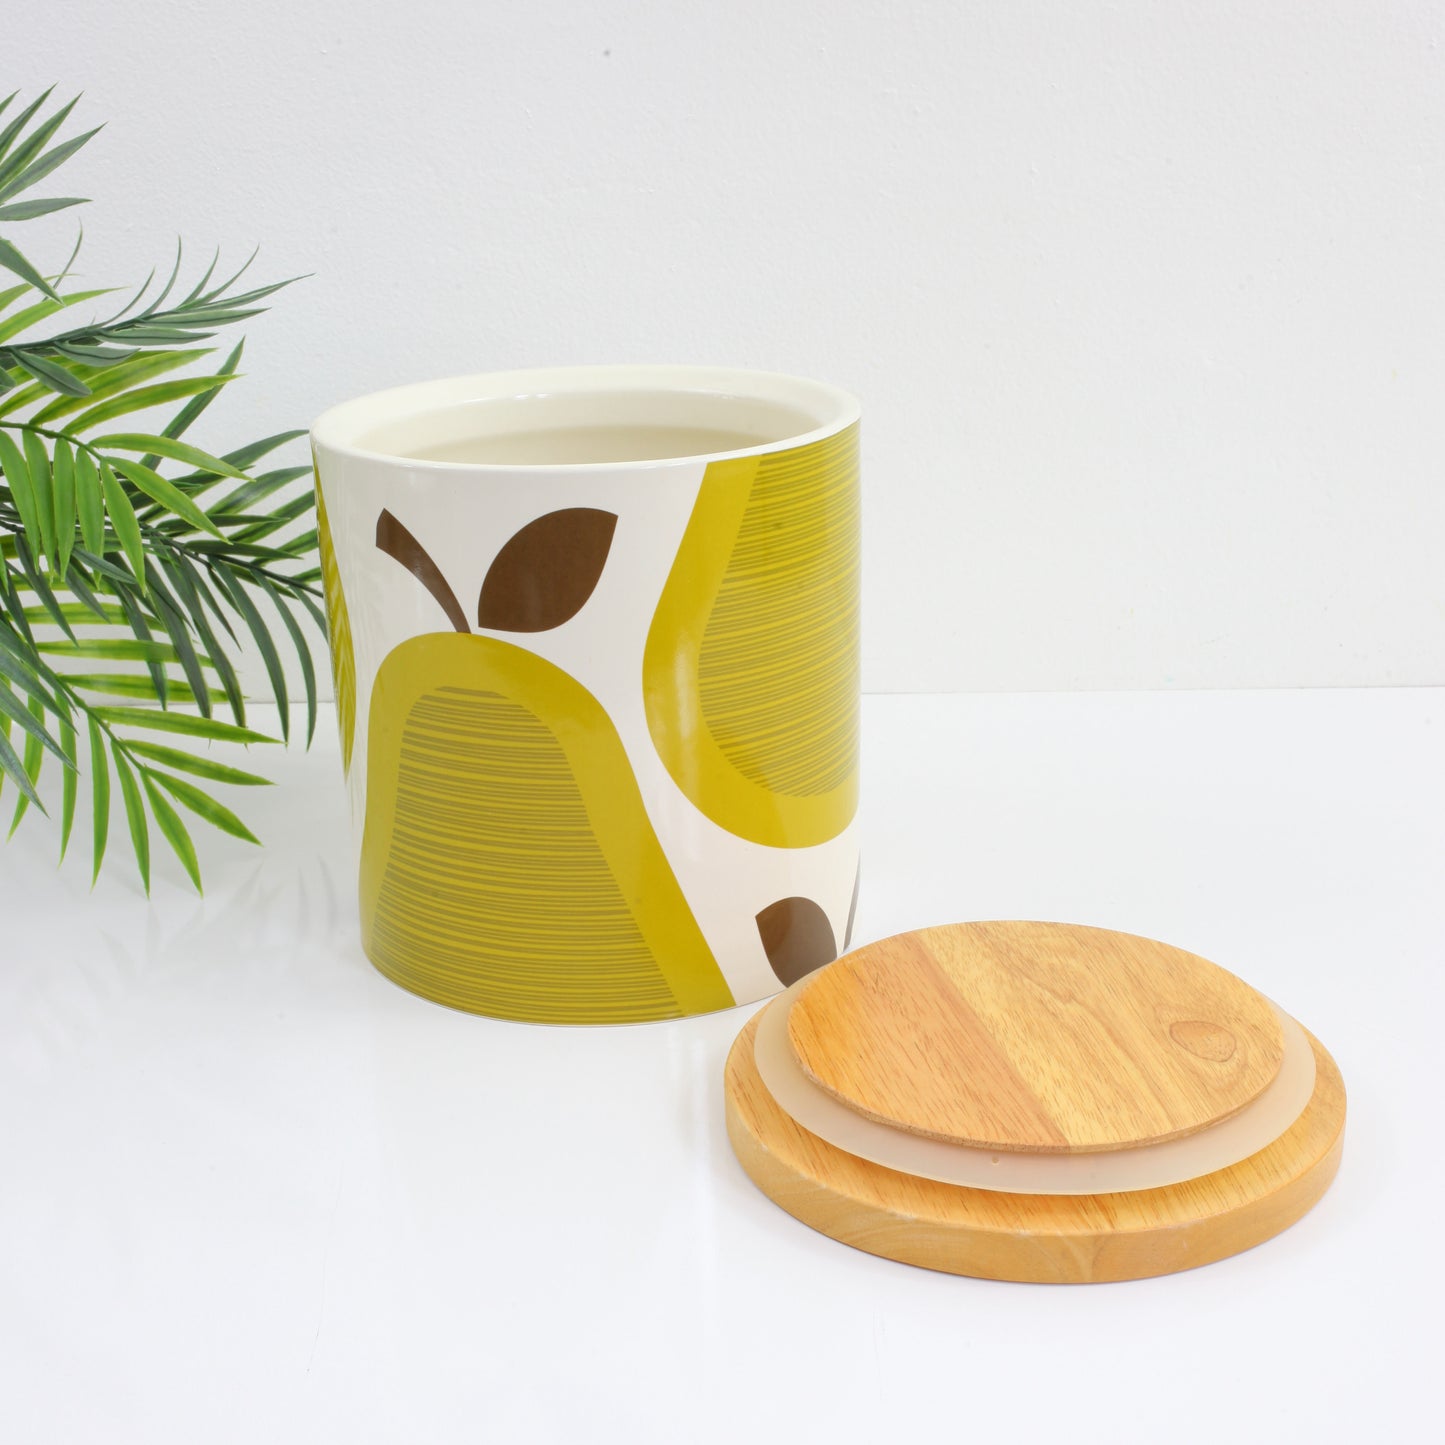 SOLD - Orla Kiely for Target Green Pears Large Stoneware Canister